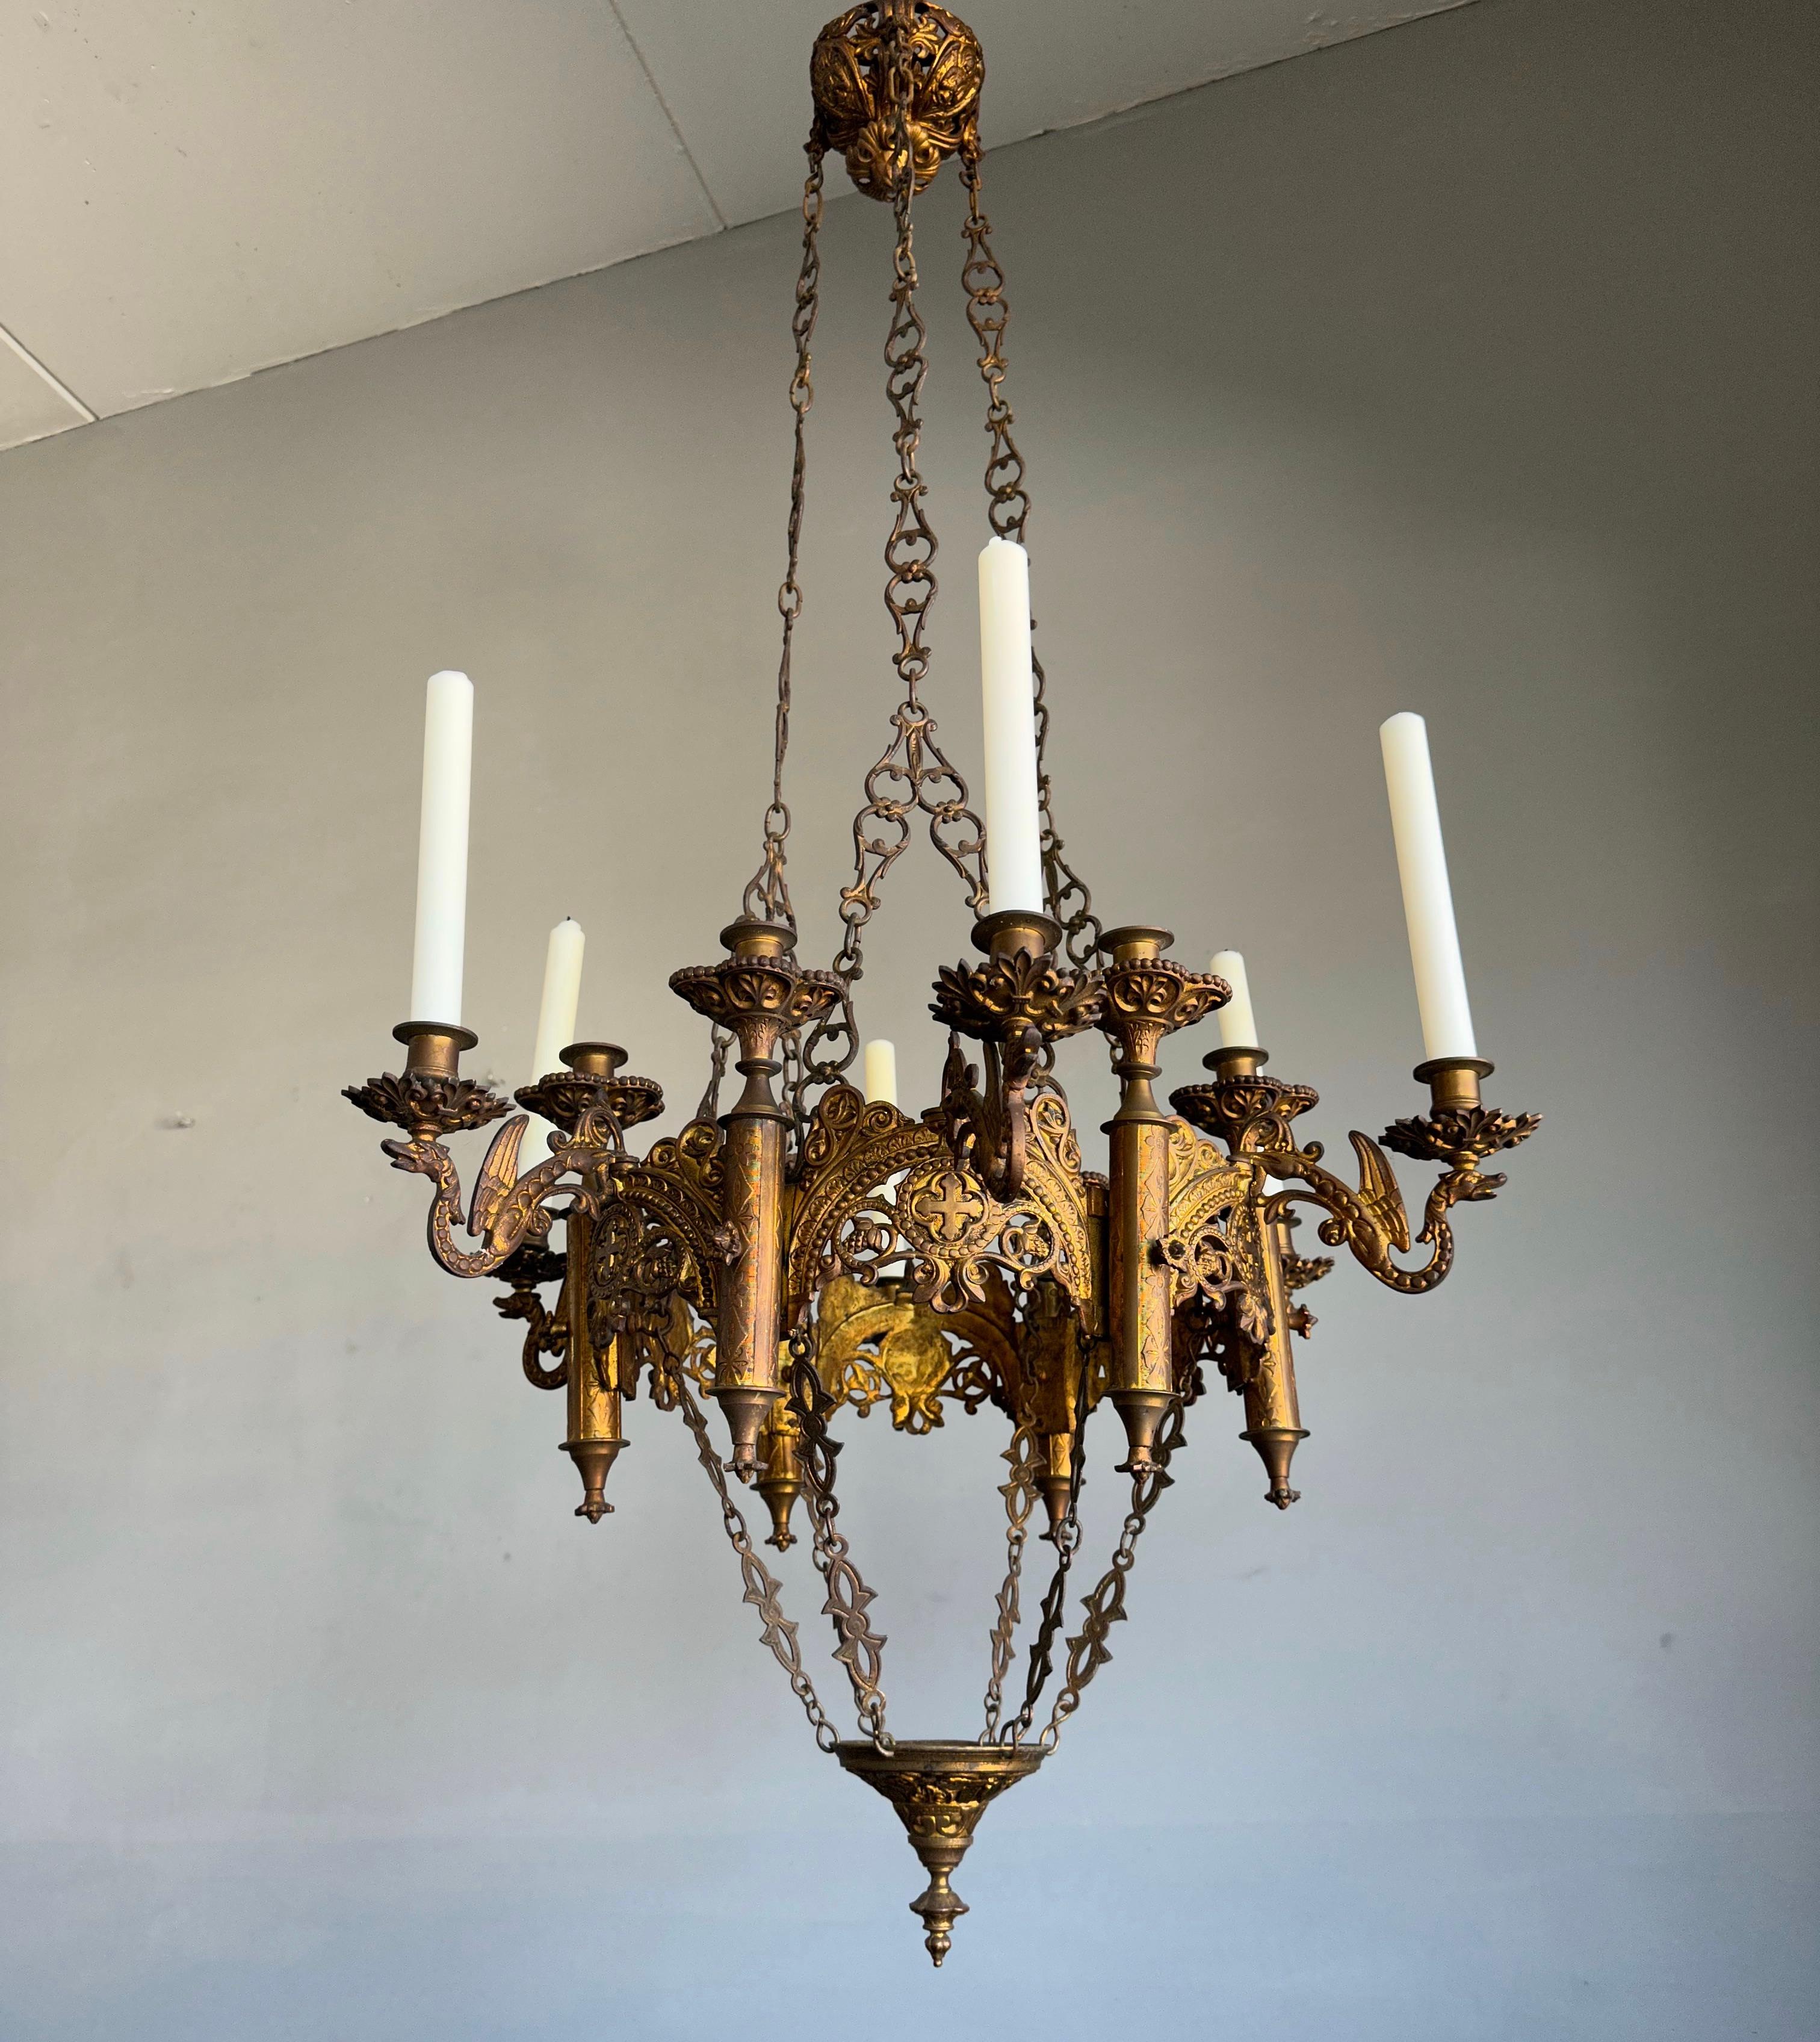 Large & Stunning Antique Fine Bronze Gothic Revival 12 Light Chandelier Pendant In Good Condition For Sale In Lisse, NL